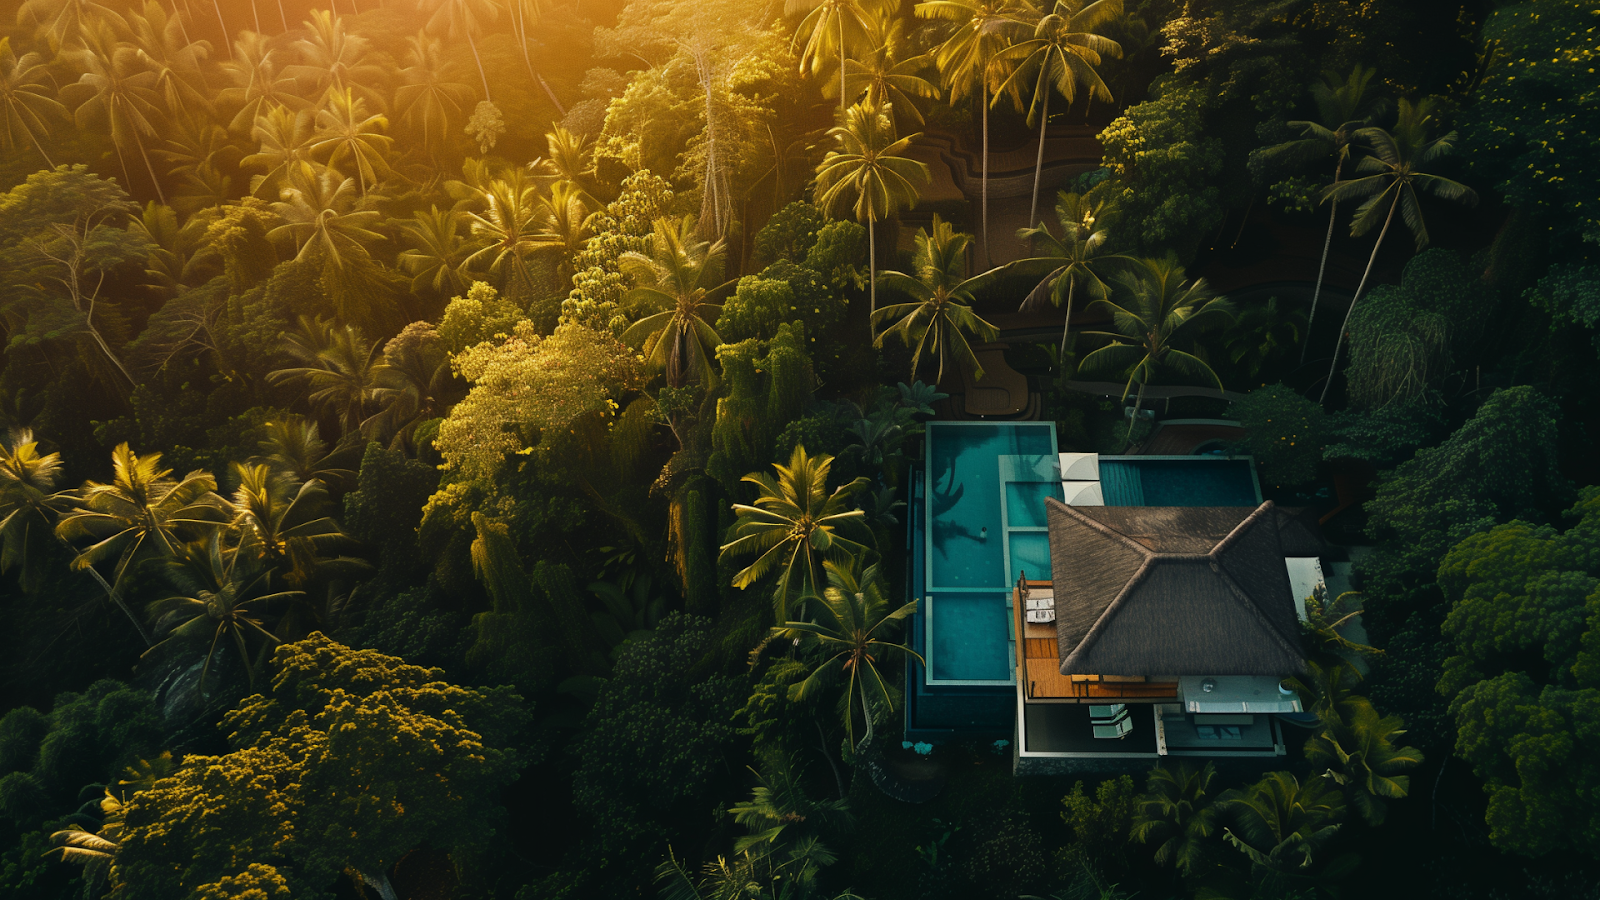 Luxurious villa with infinity pool in Ubud’s lush jungle, highlighting the privacy and exclusivity of the luxury retreat.